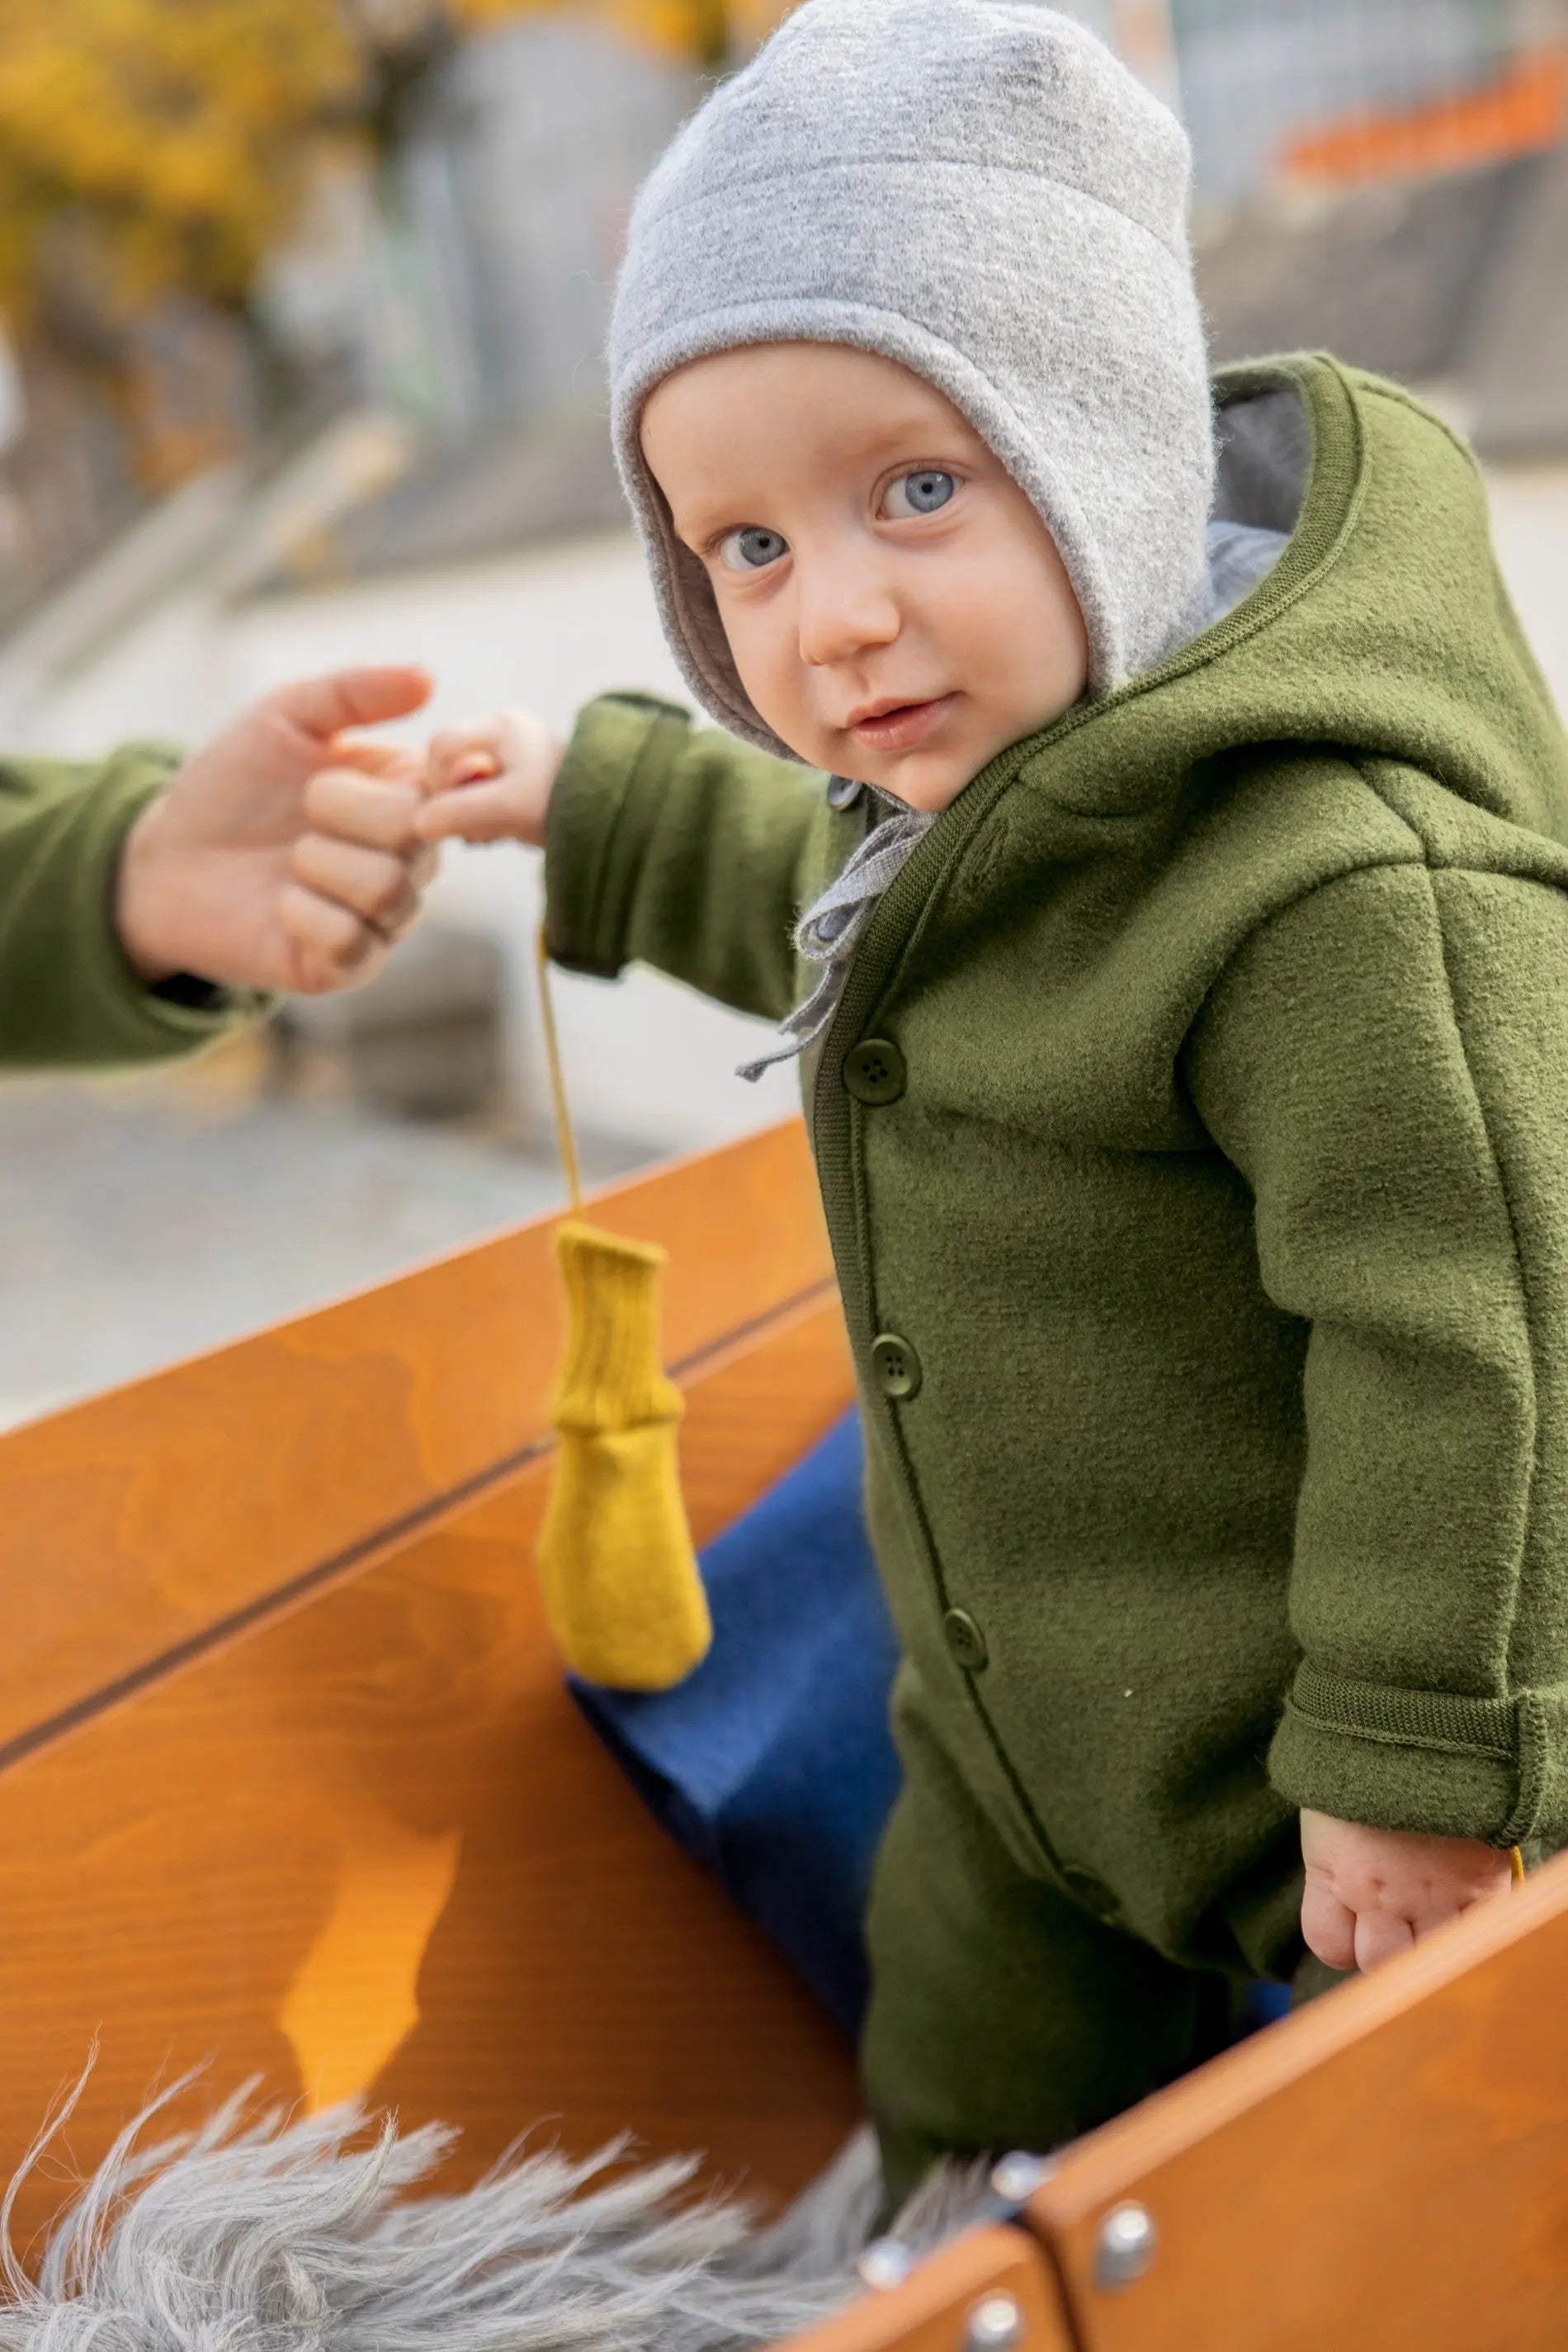 Baby/Toddler Boiled Wool Overalls with Hood by Disana from Woollykins